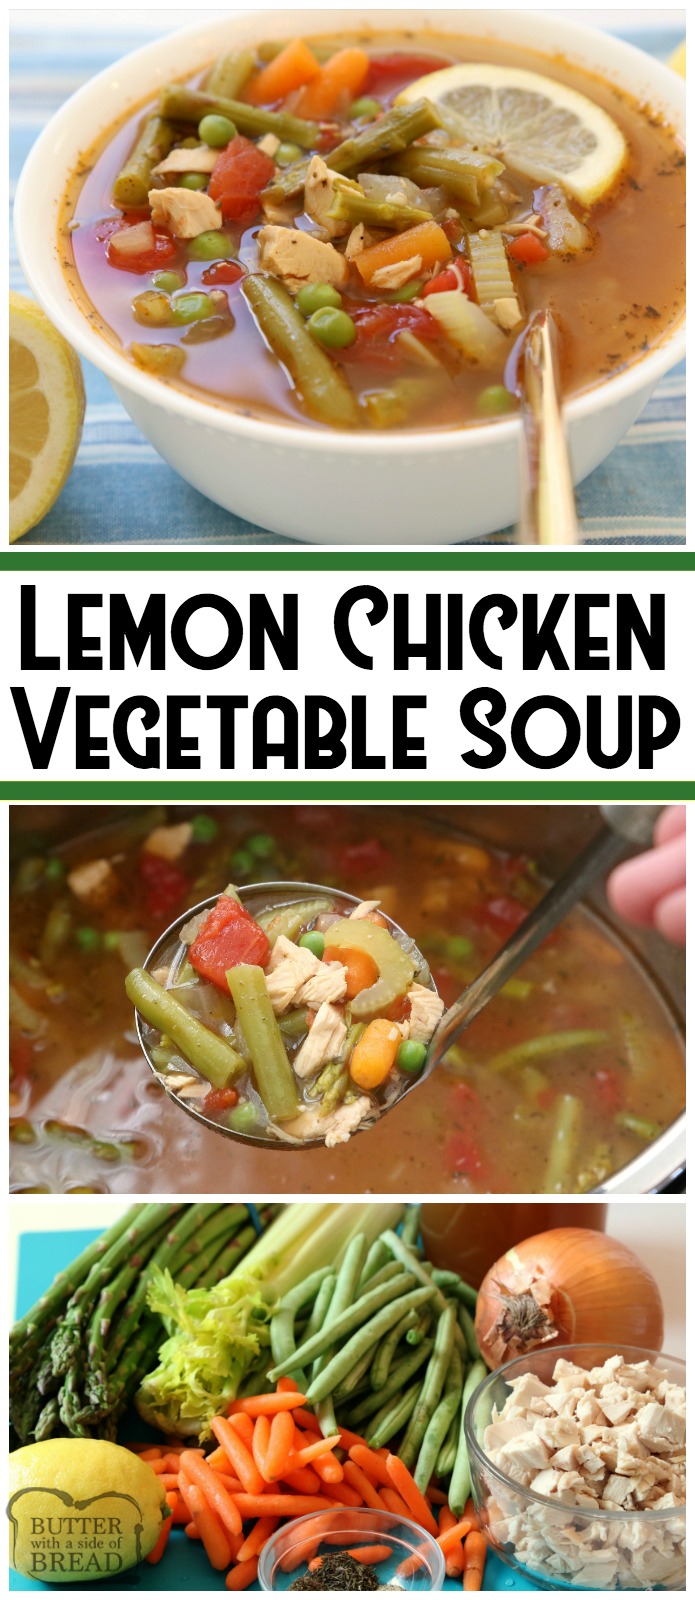 Lemon Chicken Vegetable Soup is a light & delicious broth-based vegetable soup recipe with the addition of tender chicken and fresh lemon. Chocked full of fresh vegetables like green beans, asparagus, carrots and tomatoes. Perfect for the cool days of early Spring, or anytime really! Easy #Lemon #chicken #vegetable #soup #recipe from Butter With A Side of Bread #instantpot #food #dinner #healthy